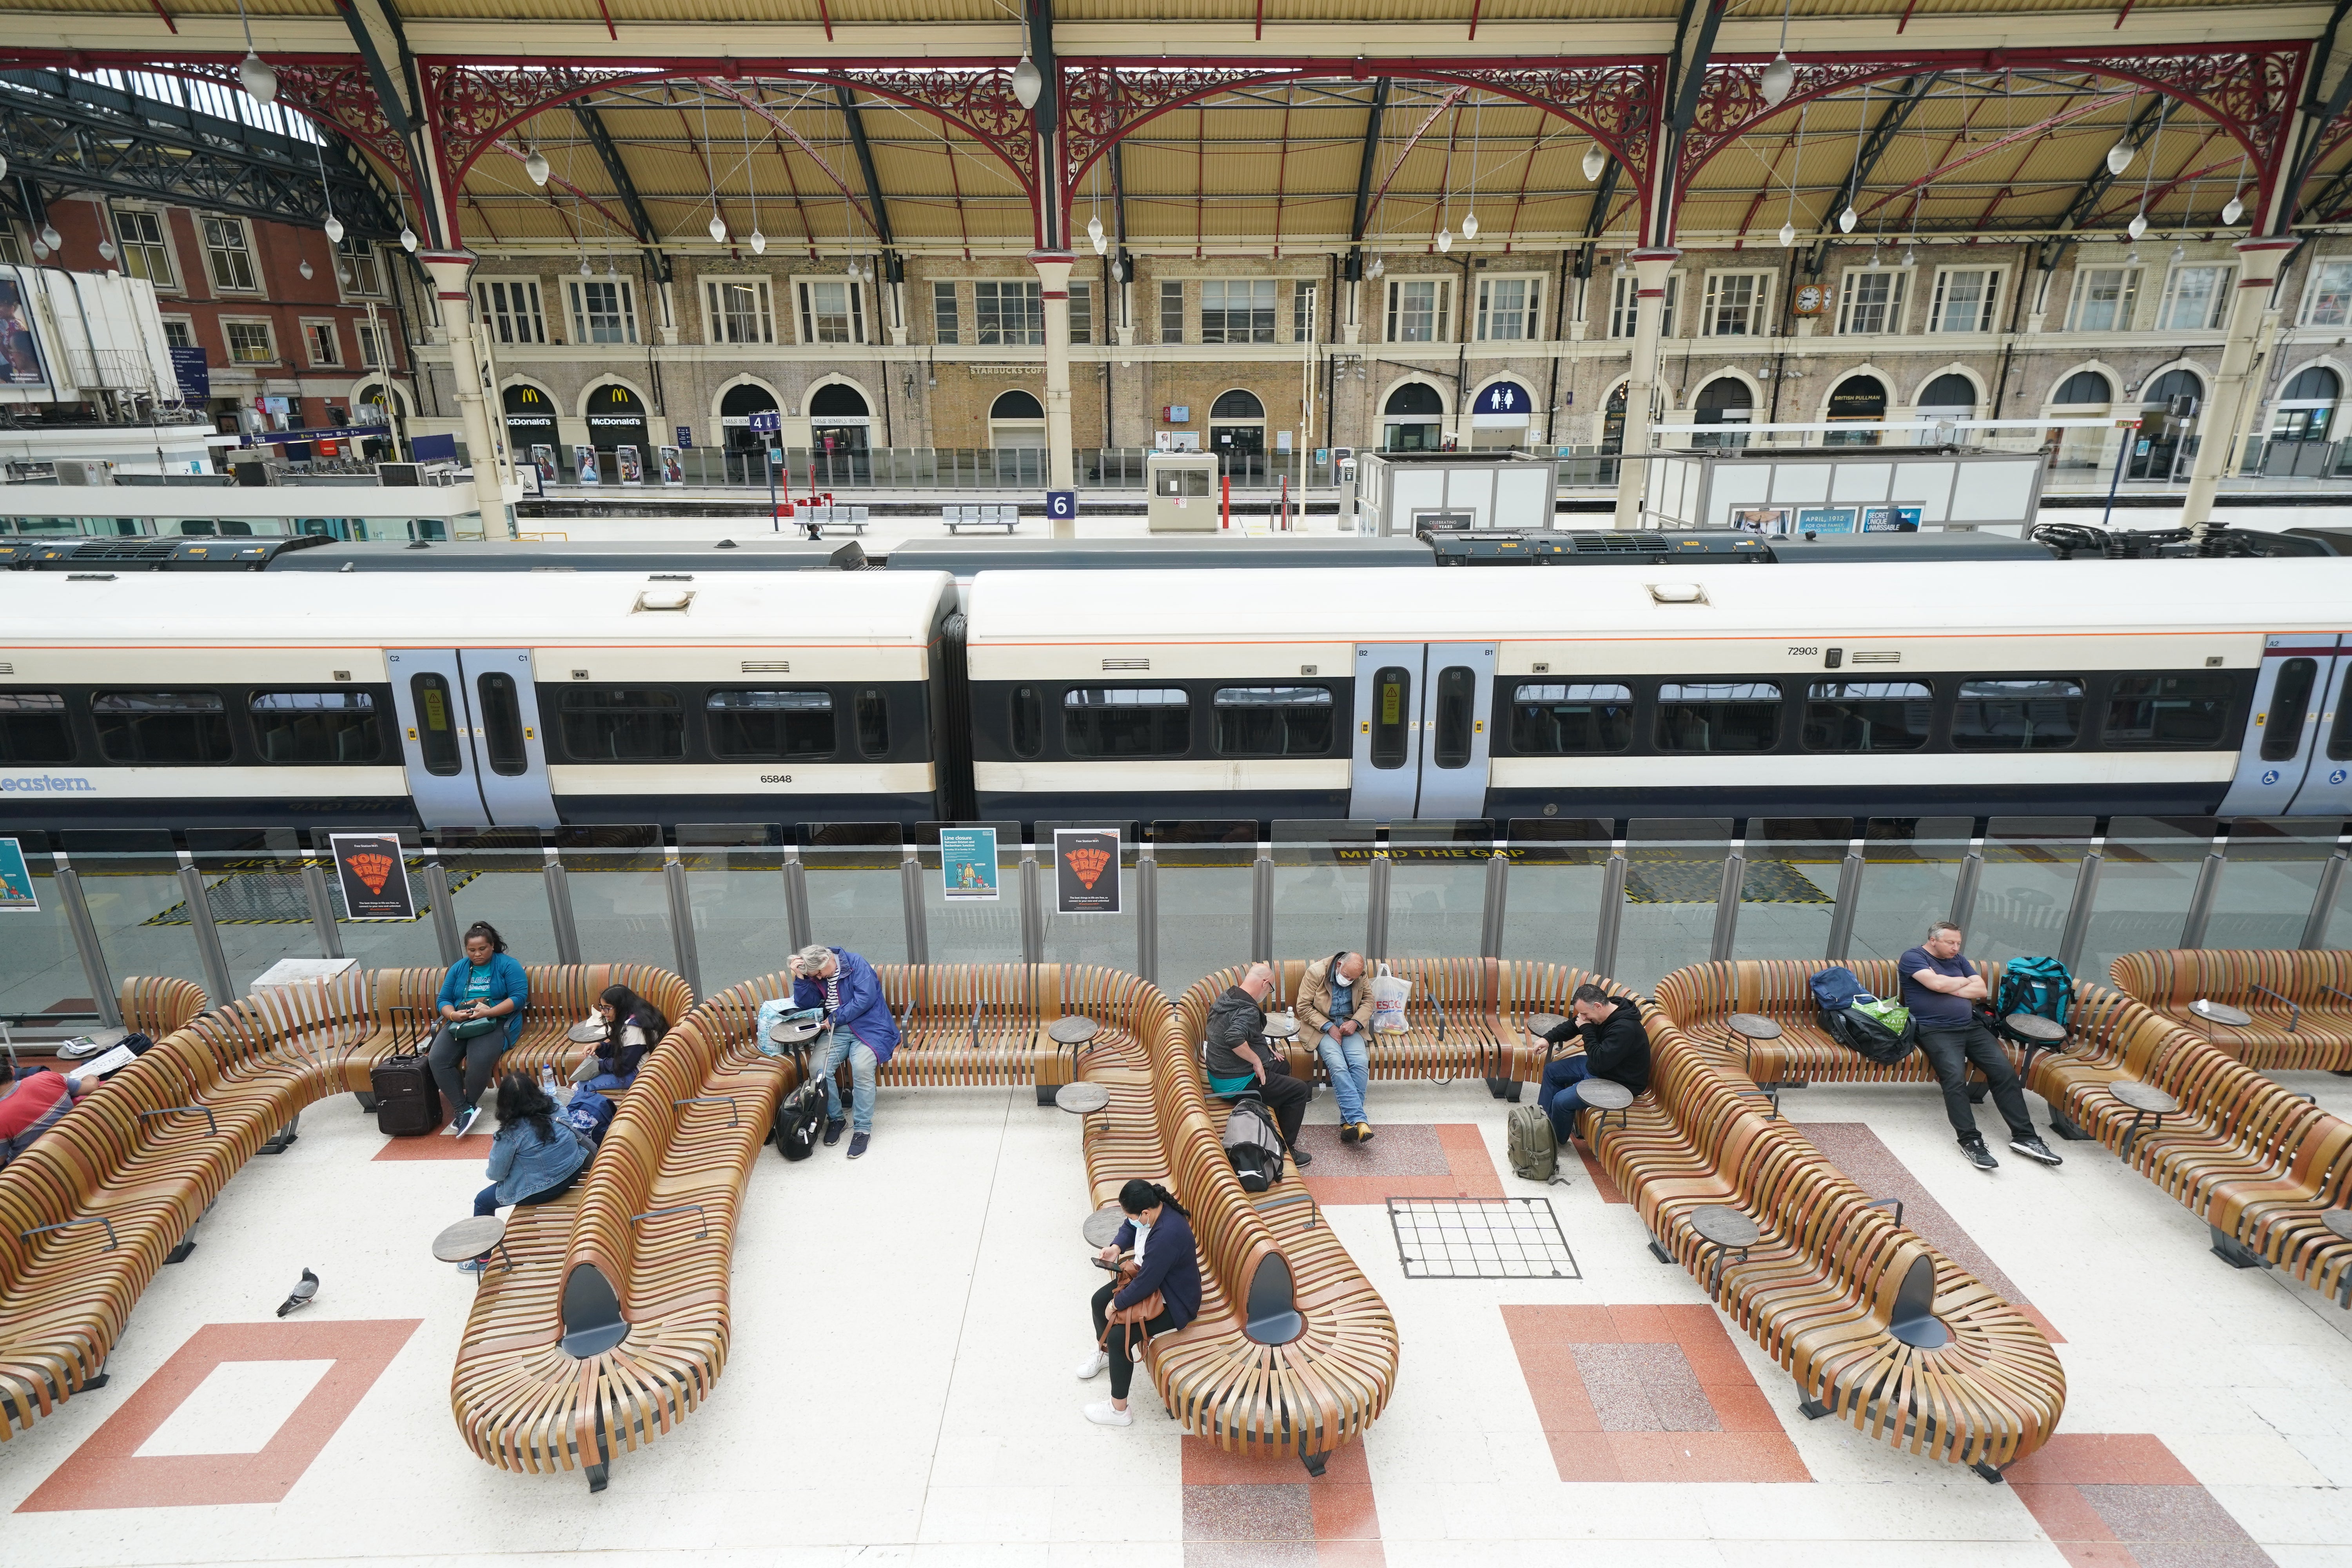 Passengers sit in a waiting area during rush hour at Victoria station in London (Kirsty O’Connor/PA)